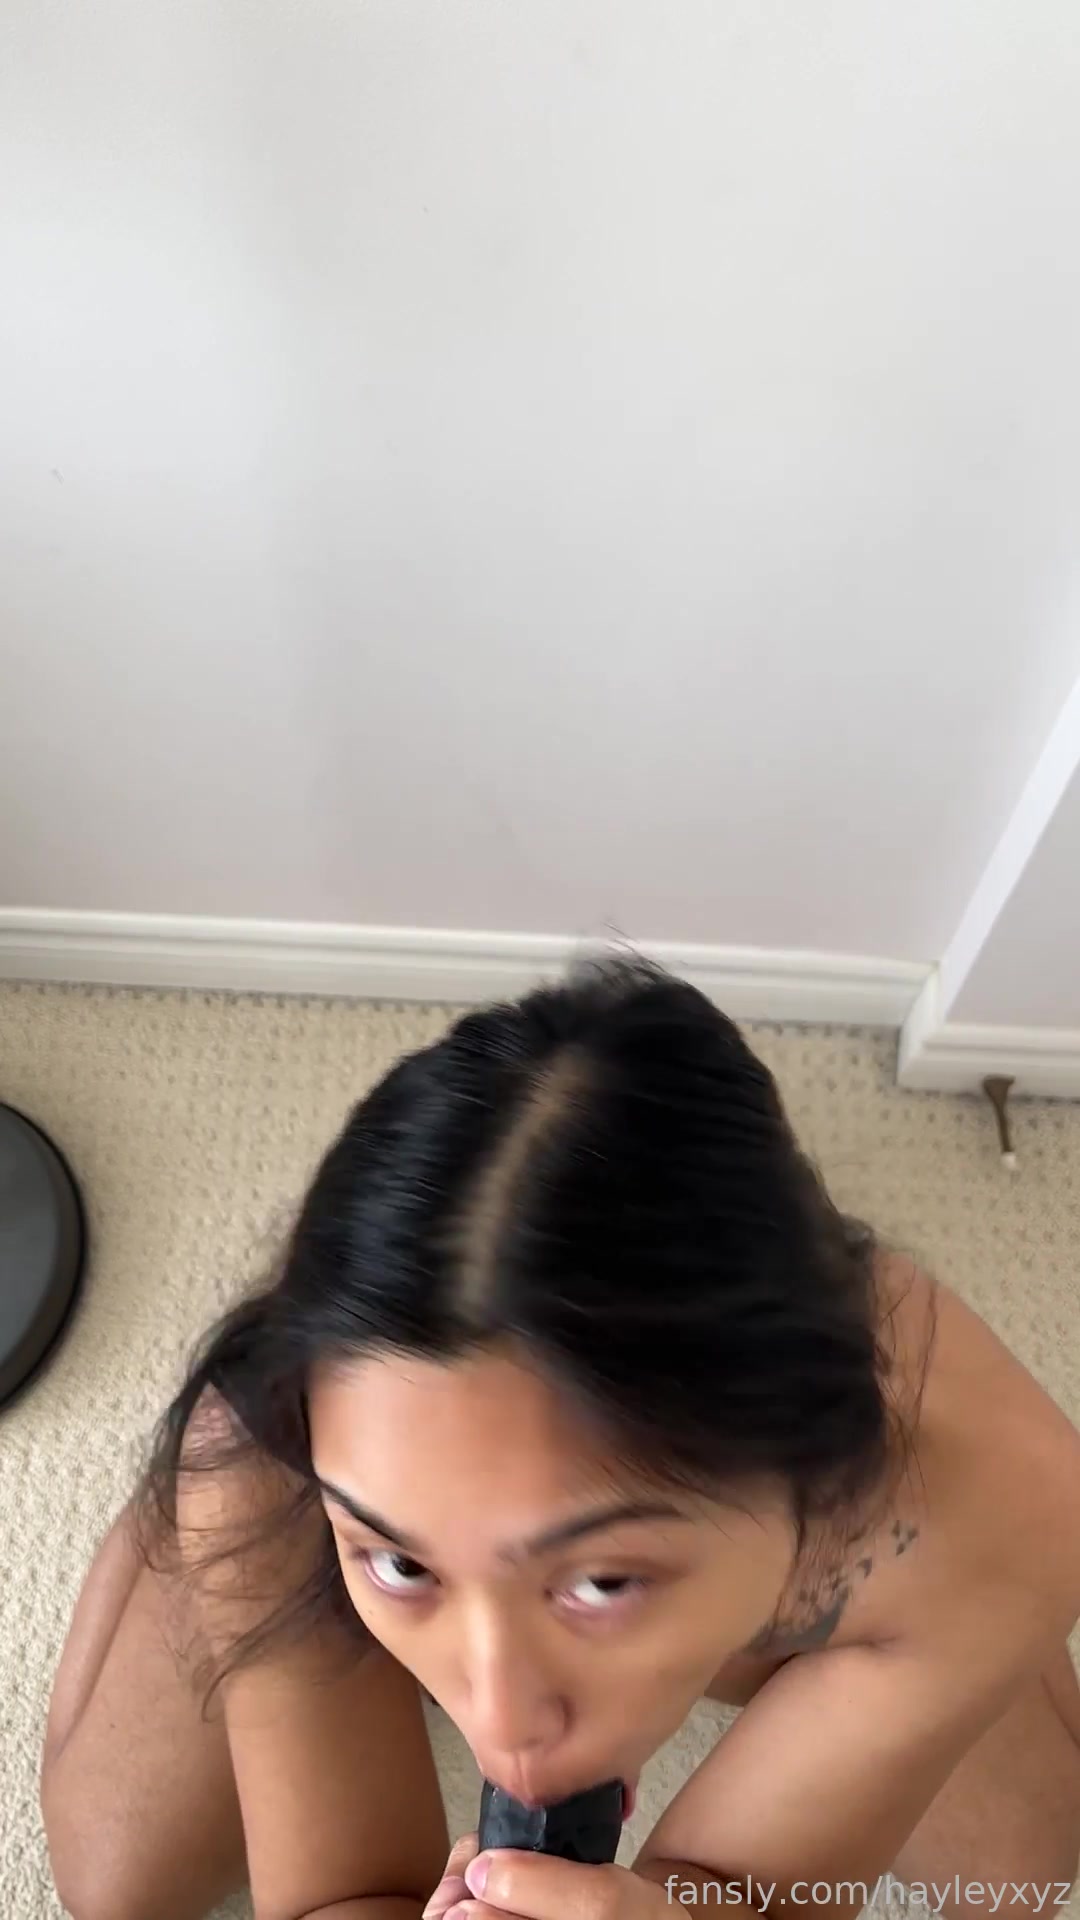 Hayleyxyz-03-04-2023-Can i Suck And Fuck Your Cock Dildo Pov While i Talk Dirty To You And Make a Big Mess Wit